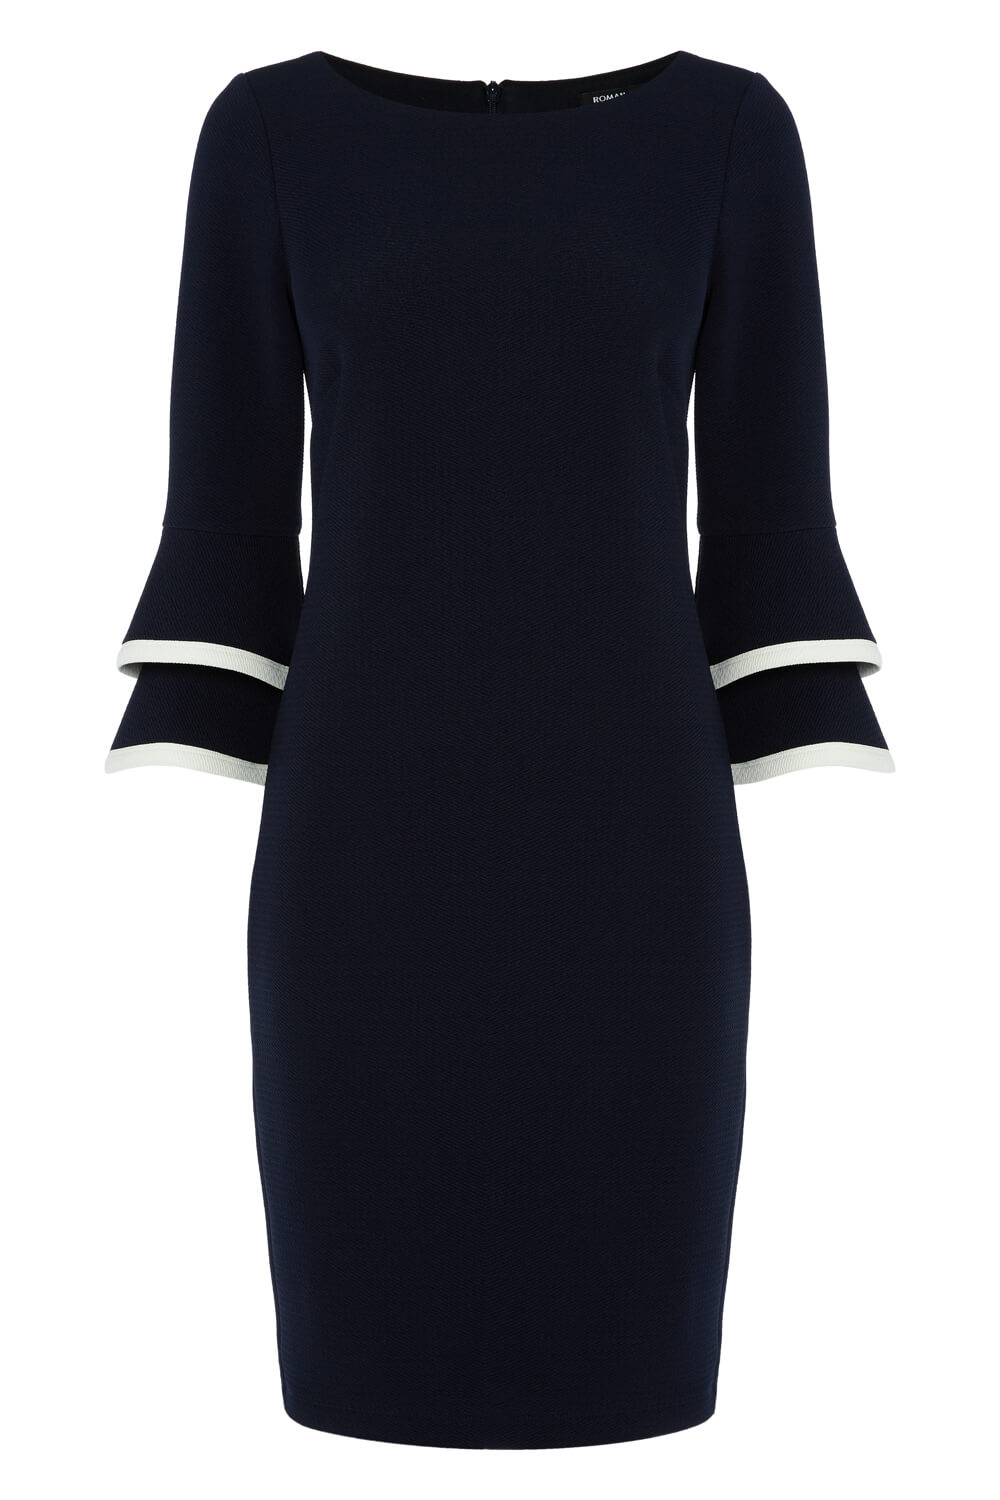 Navy  Double Fluted 3/4 Length Sleeve Dress, Image 4 of 4